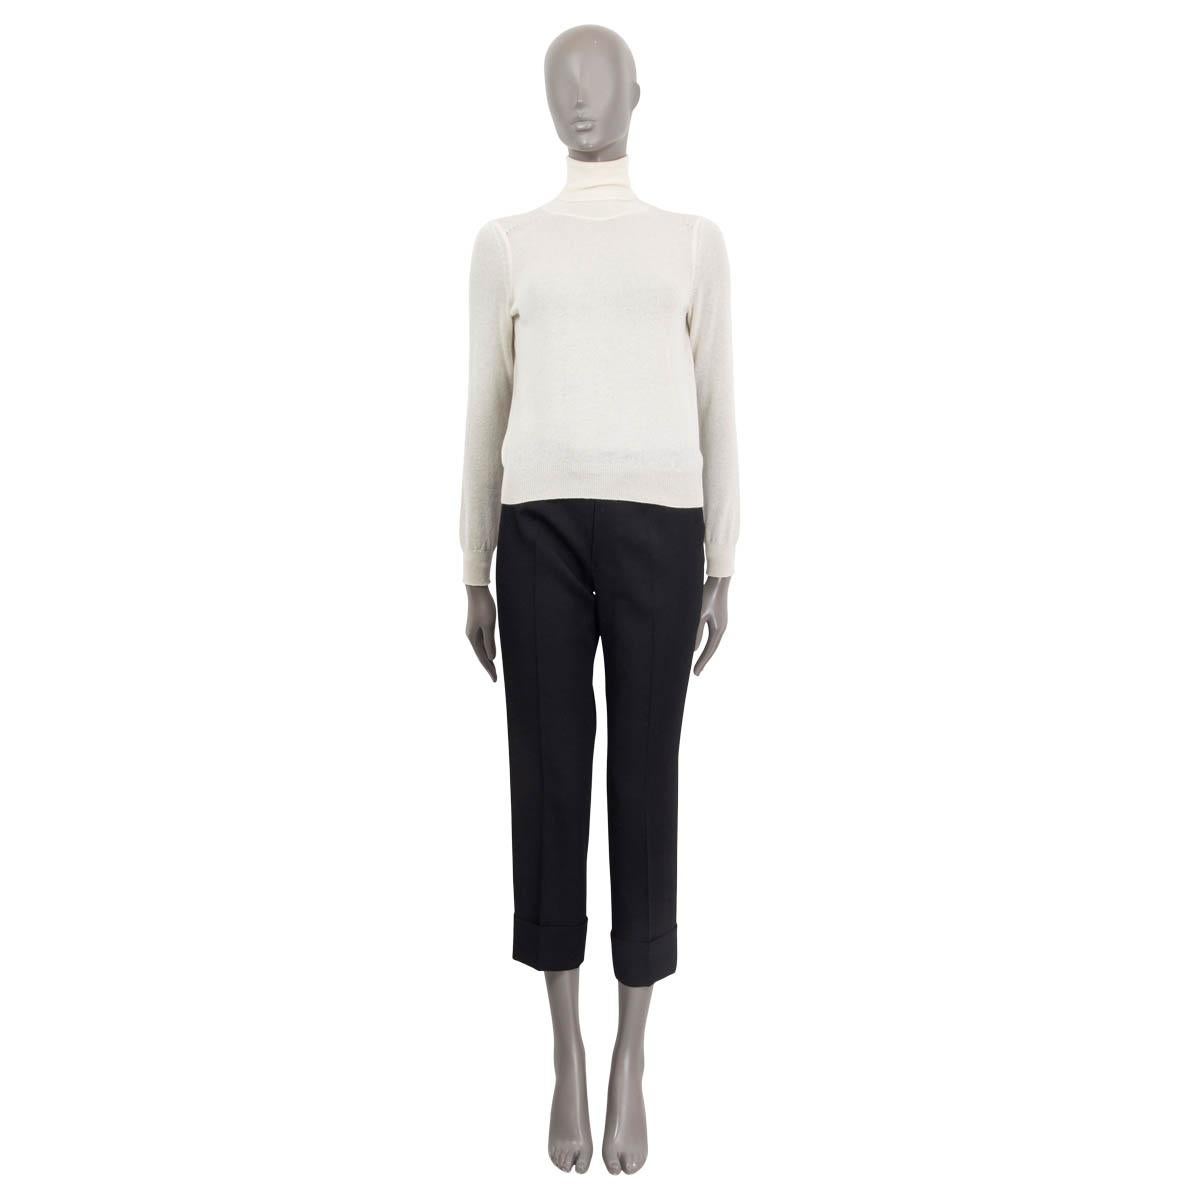 100% authentic Celine see through knit sweater in vanilla cashmere (100%). Comes with a ribbed turtleneck, ribbed cuffs and a ribbed hemline. Unlined. Has been worn and is in excellent condition.

Measurements
Tag Size	XS
Size	XS
Shoulder Width	34cm